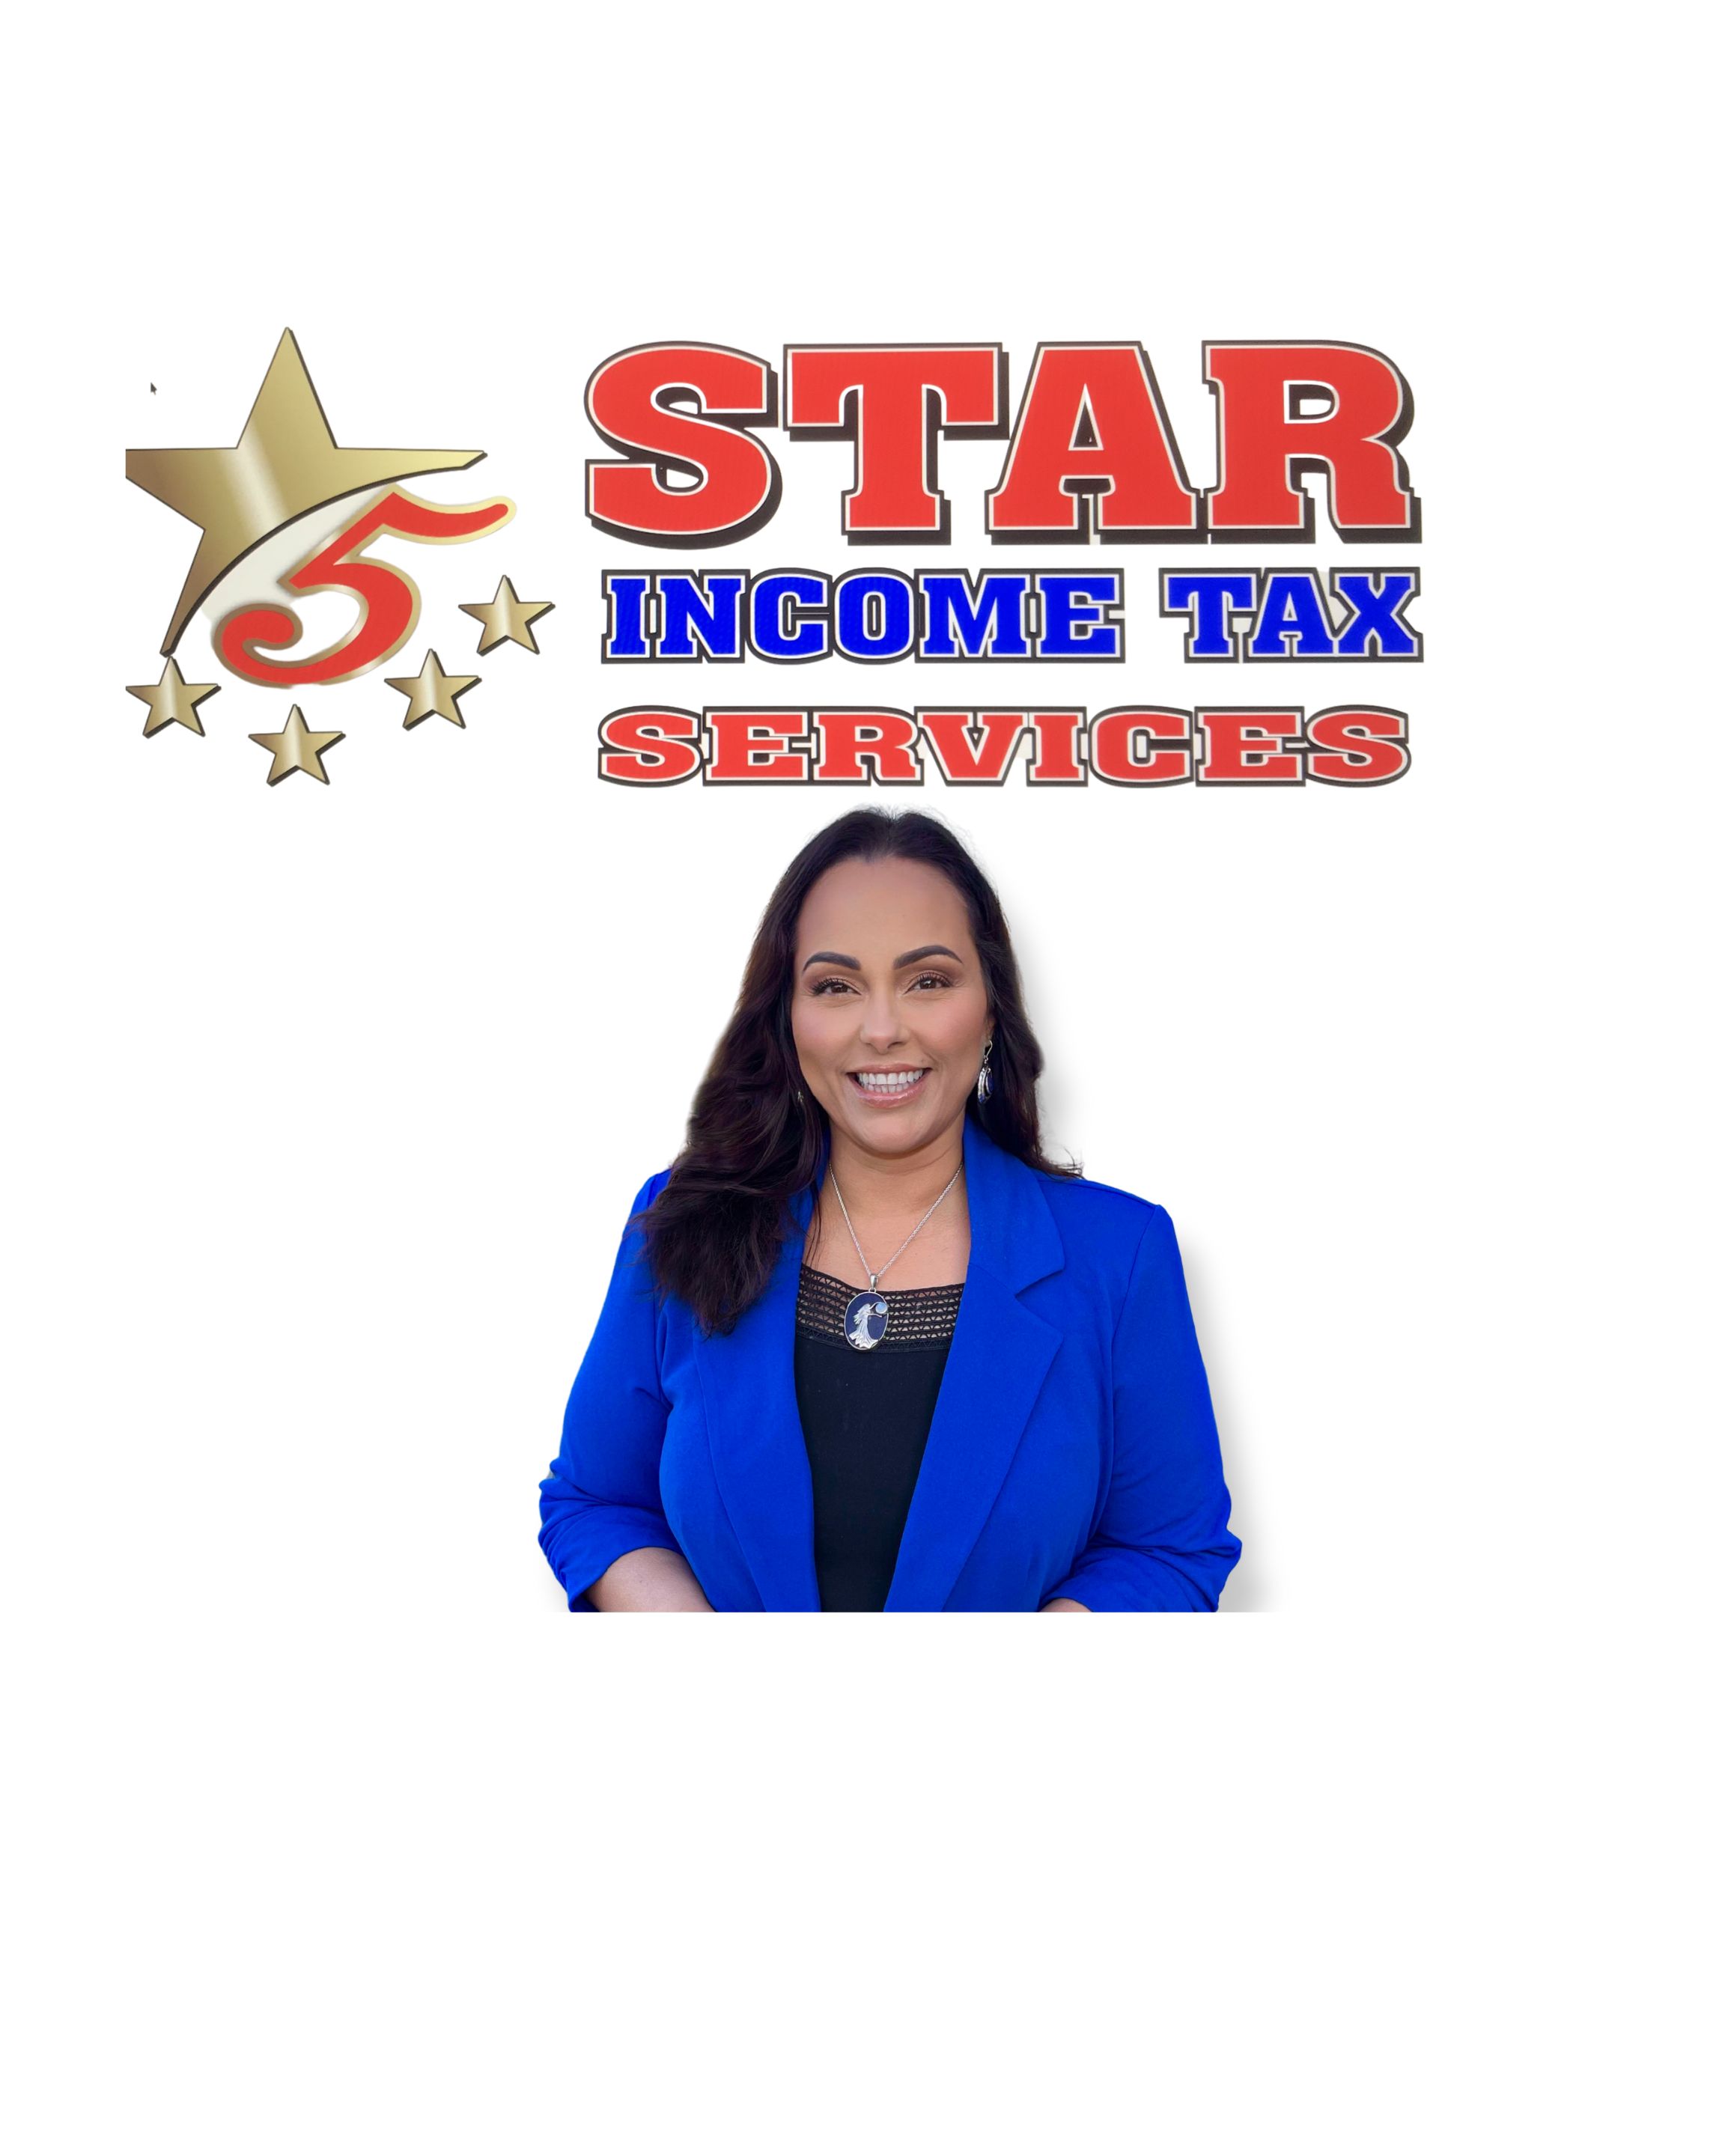 5 Star Income Tax Services Photo